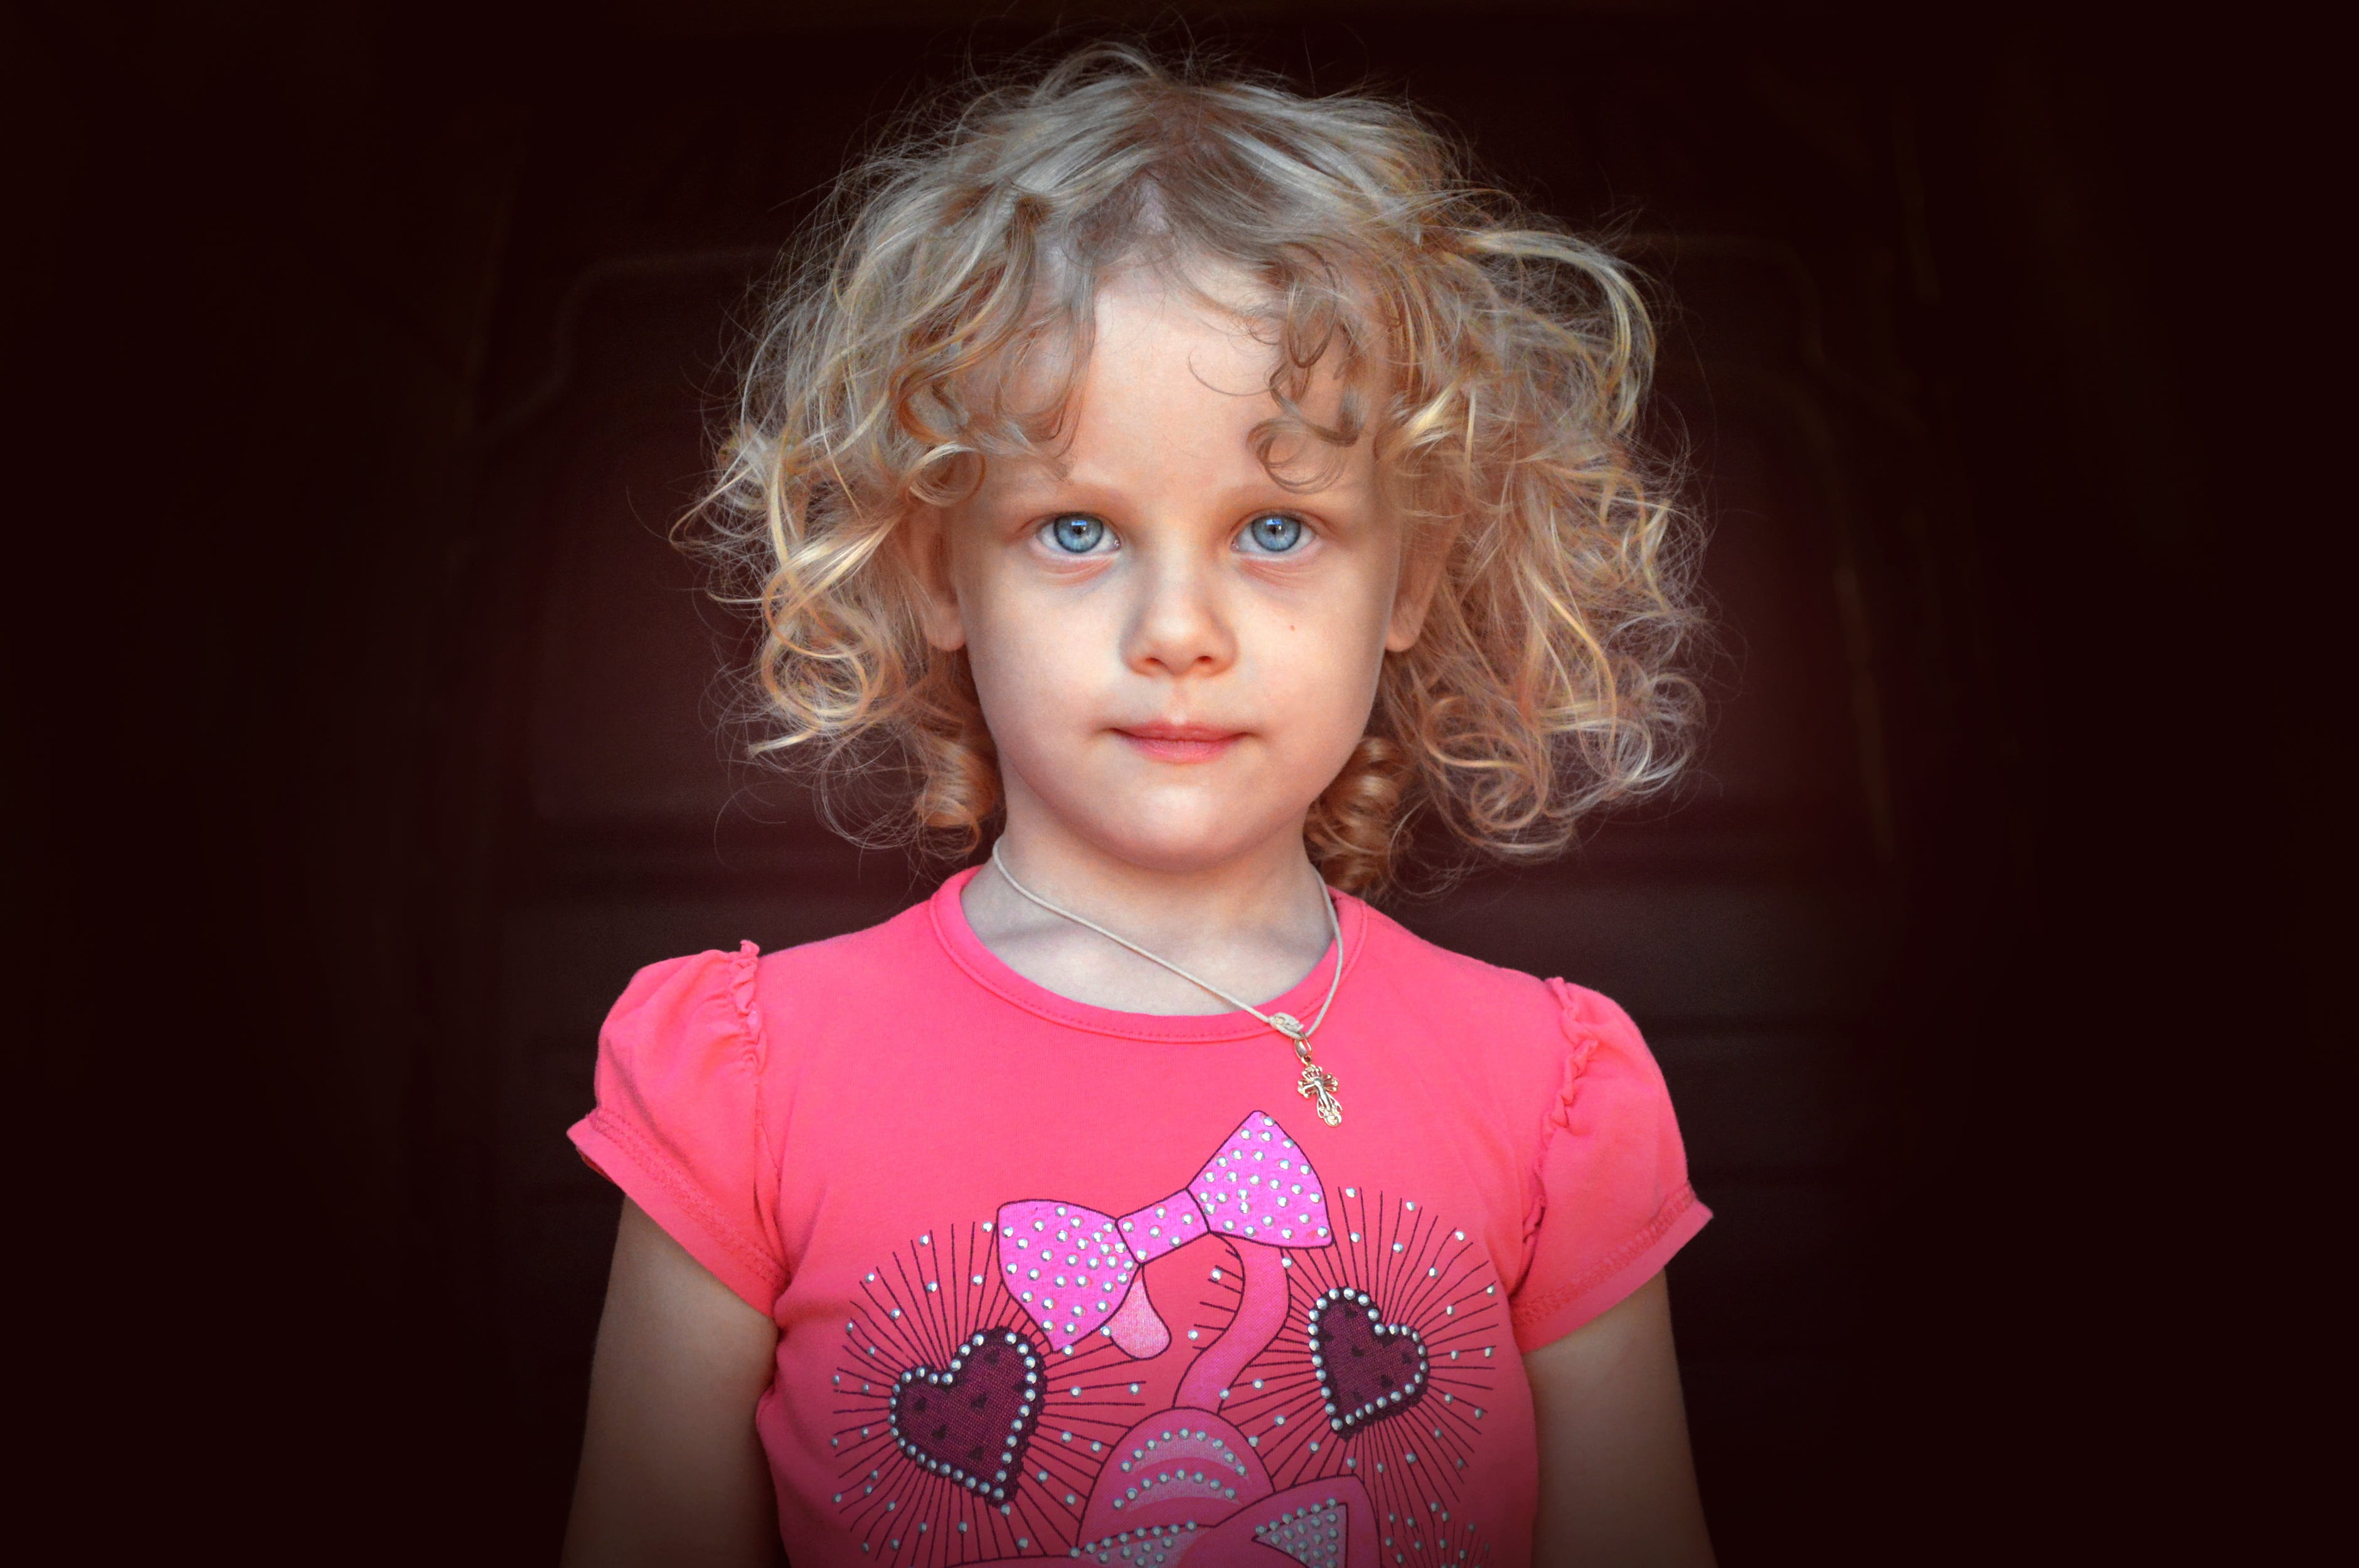 girl in pink crew-neck top, child, portrait, blonde, curly, christian